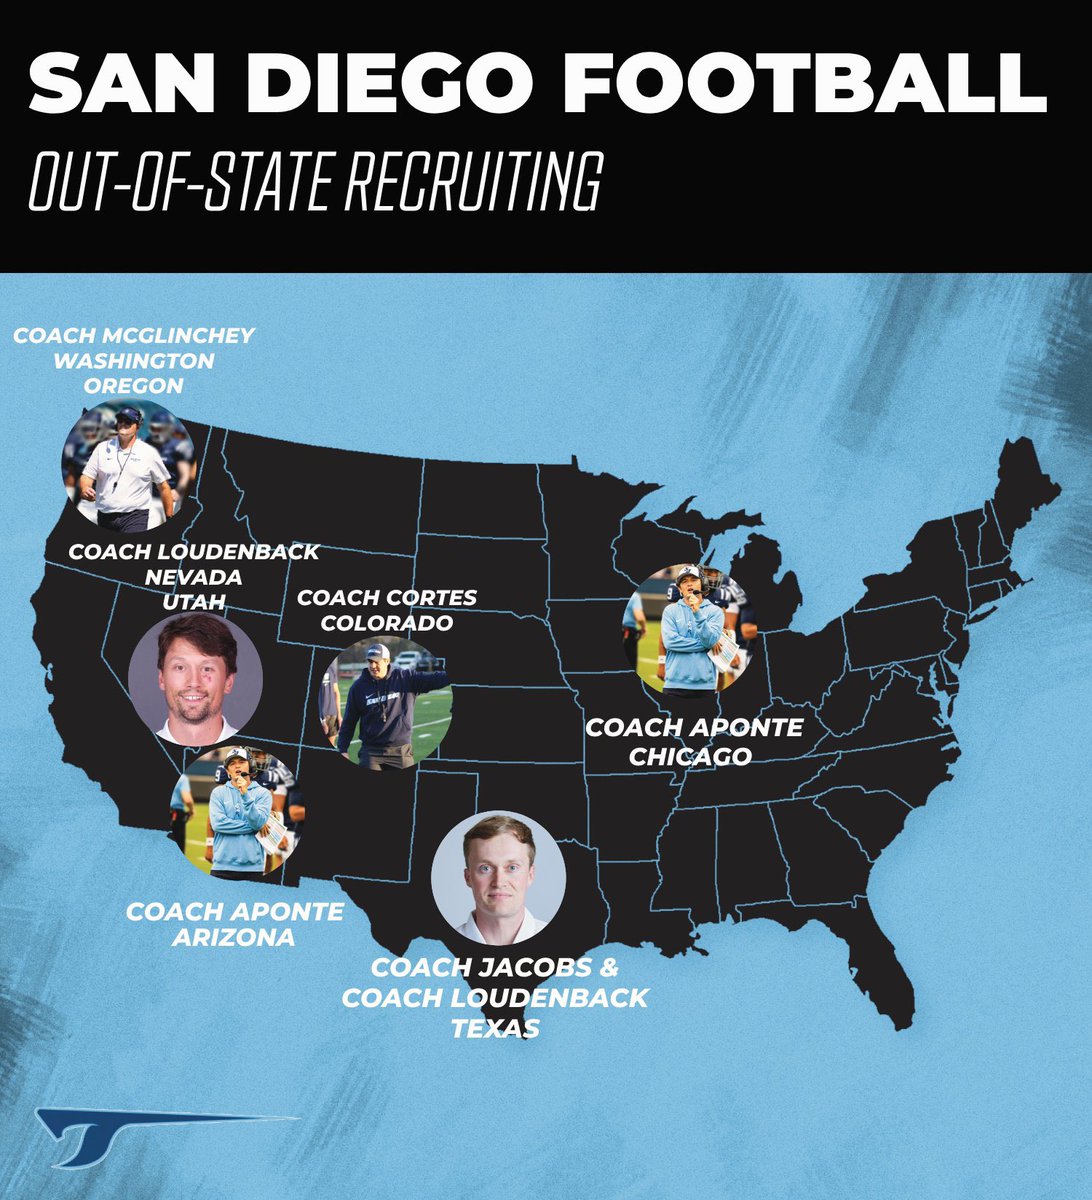 Our coaches are hitting the road! 🚙✈️ Recruits, make sure you follow the coach who is recruiting your area. Looking forward to finding the next great Toreros! #GoToreros